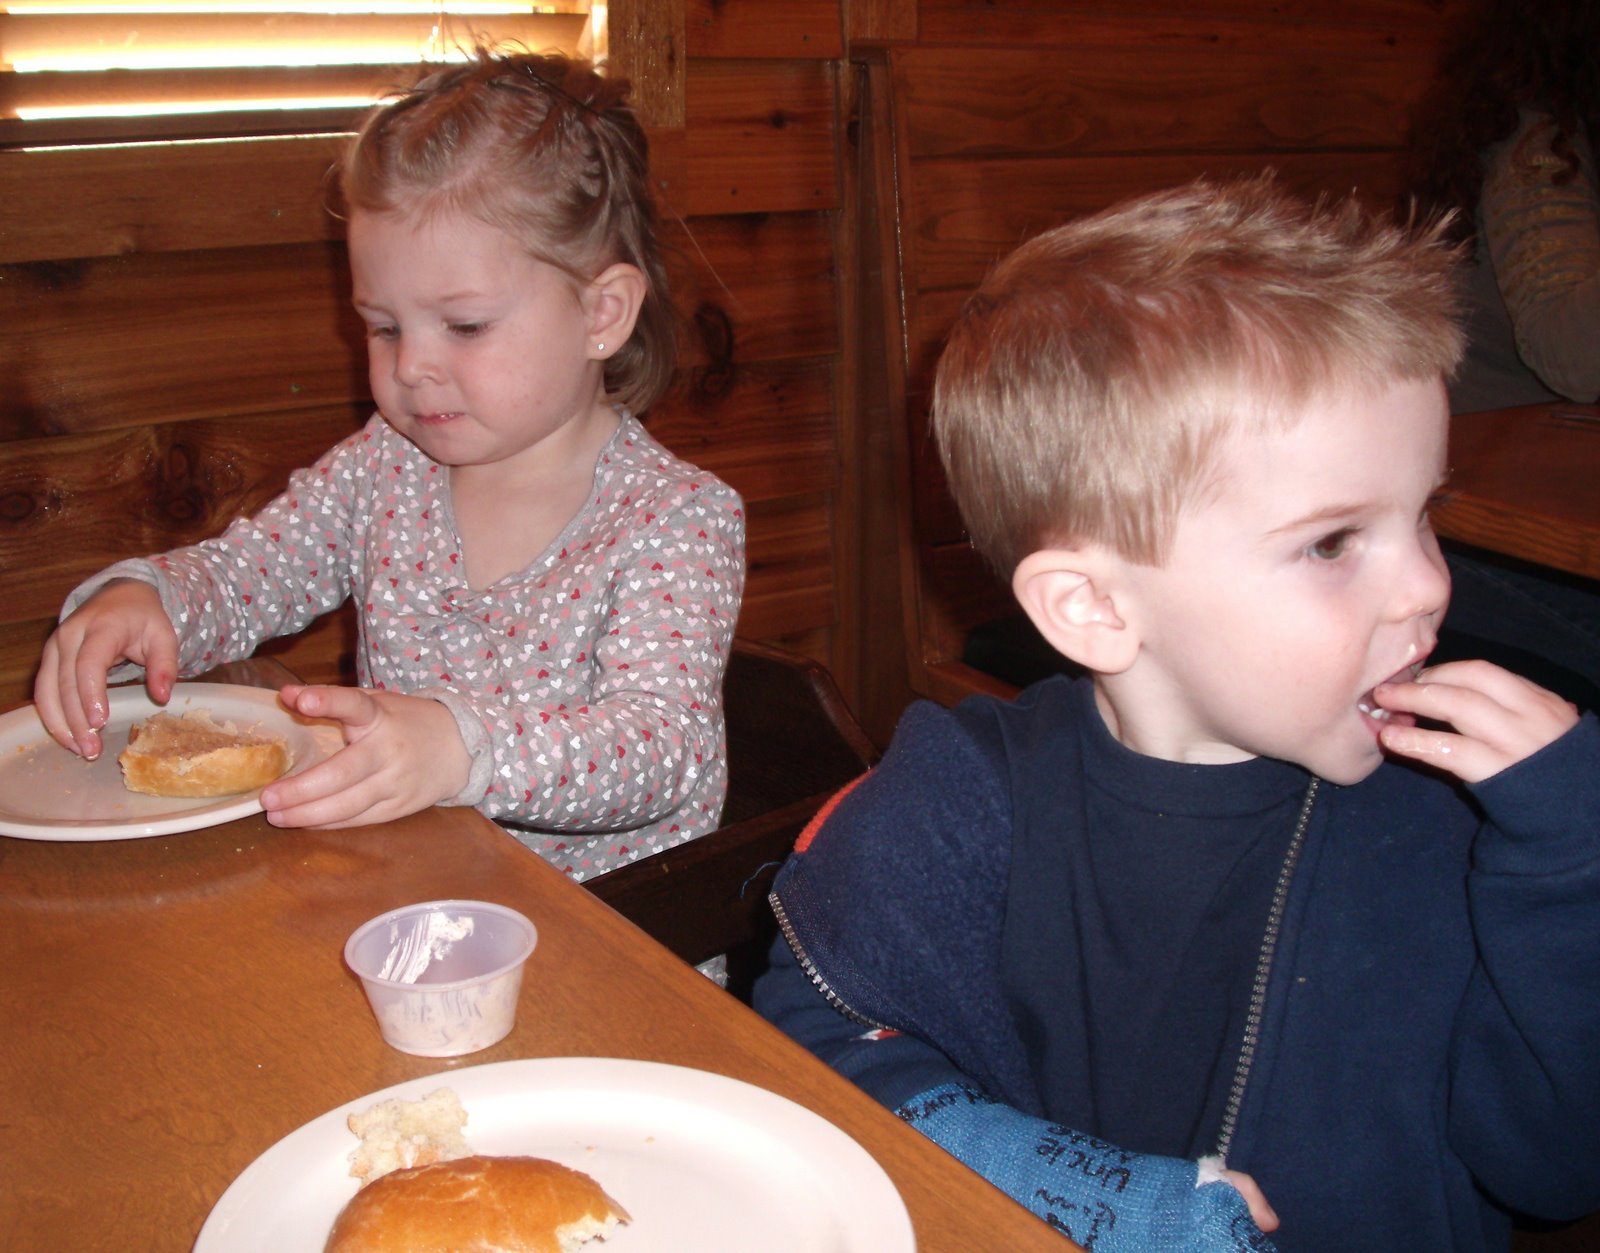 [Carter+and+Halle+and+Texas+Roadhouse.jpg]